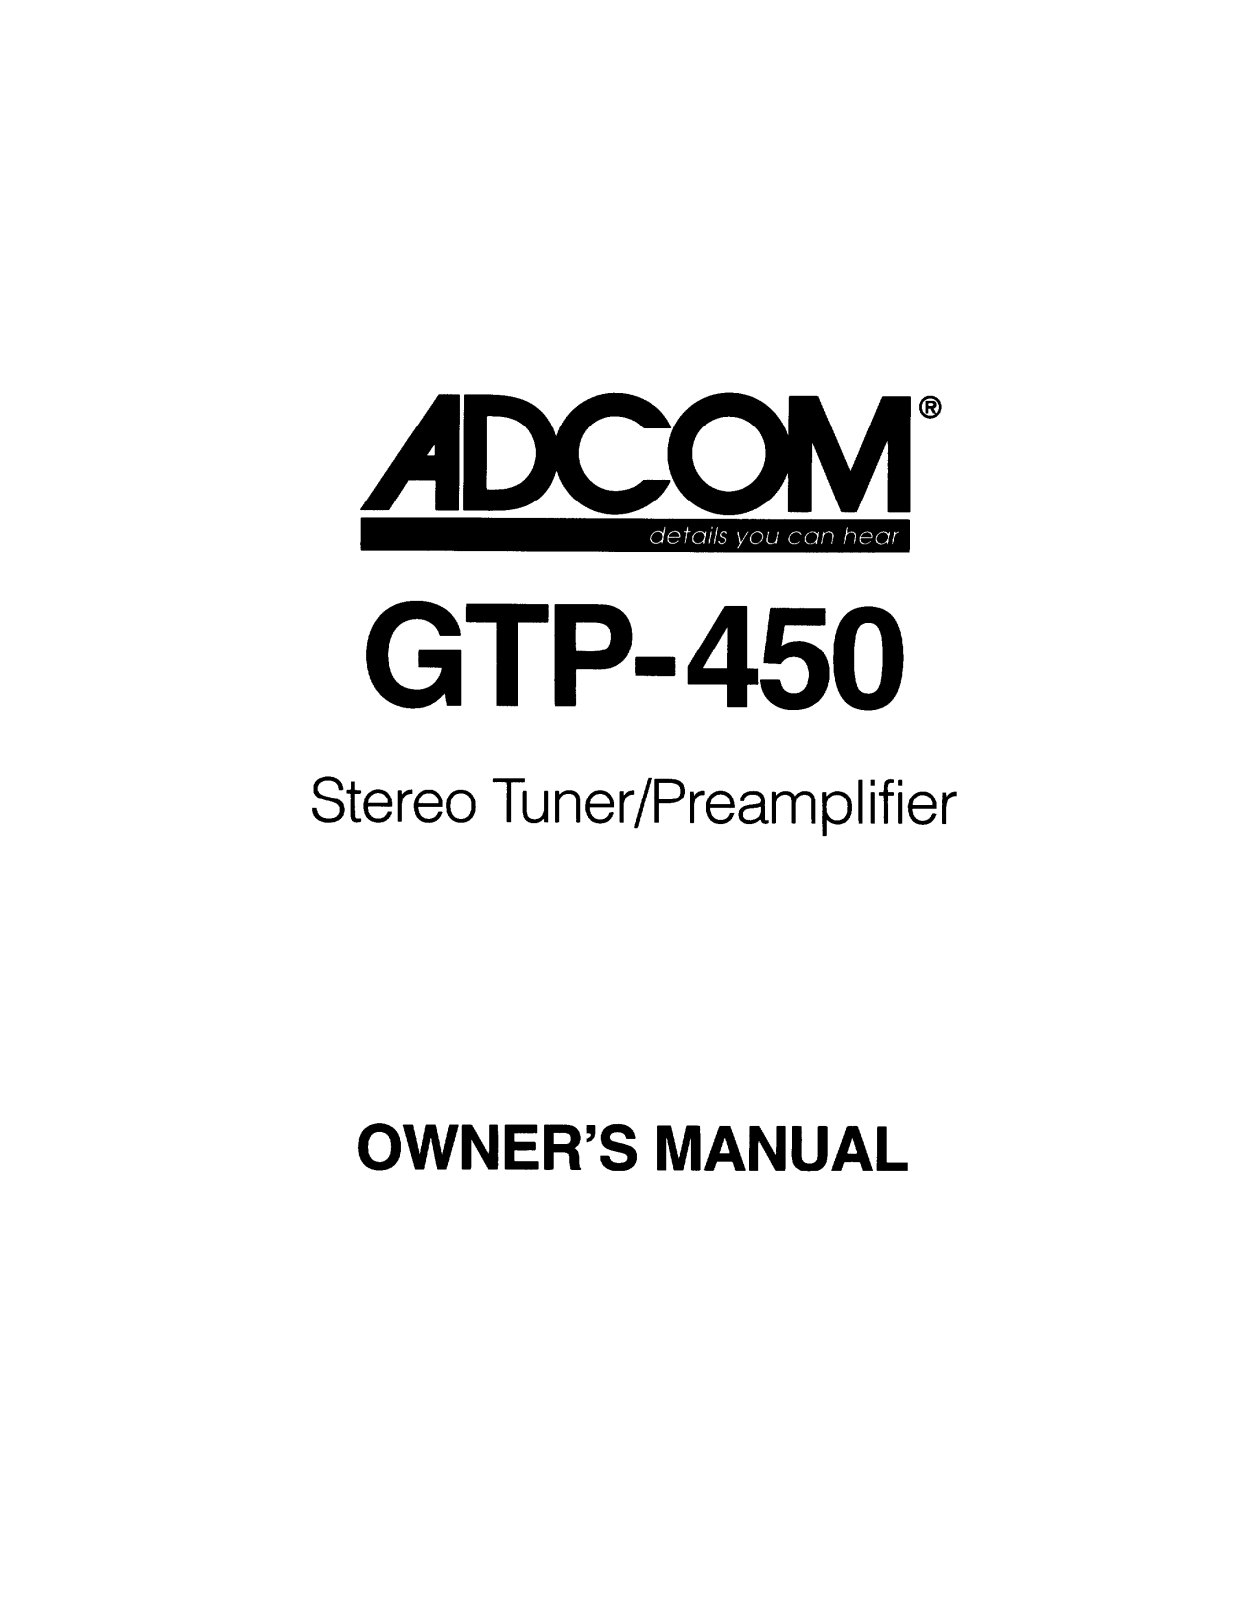 Adcom GTP-450 Owners manual